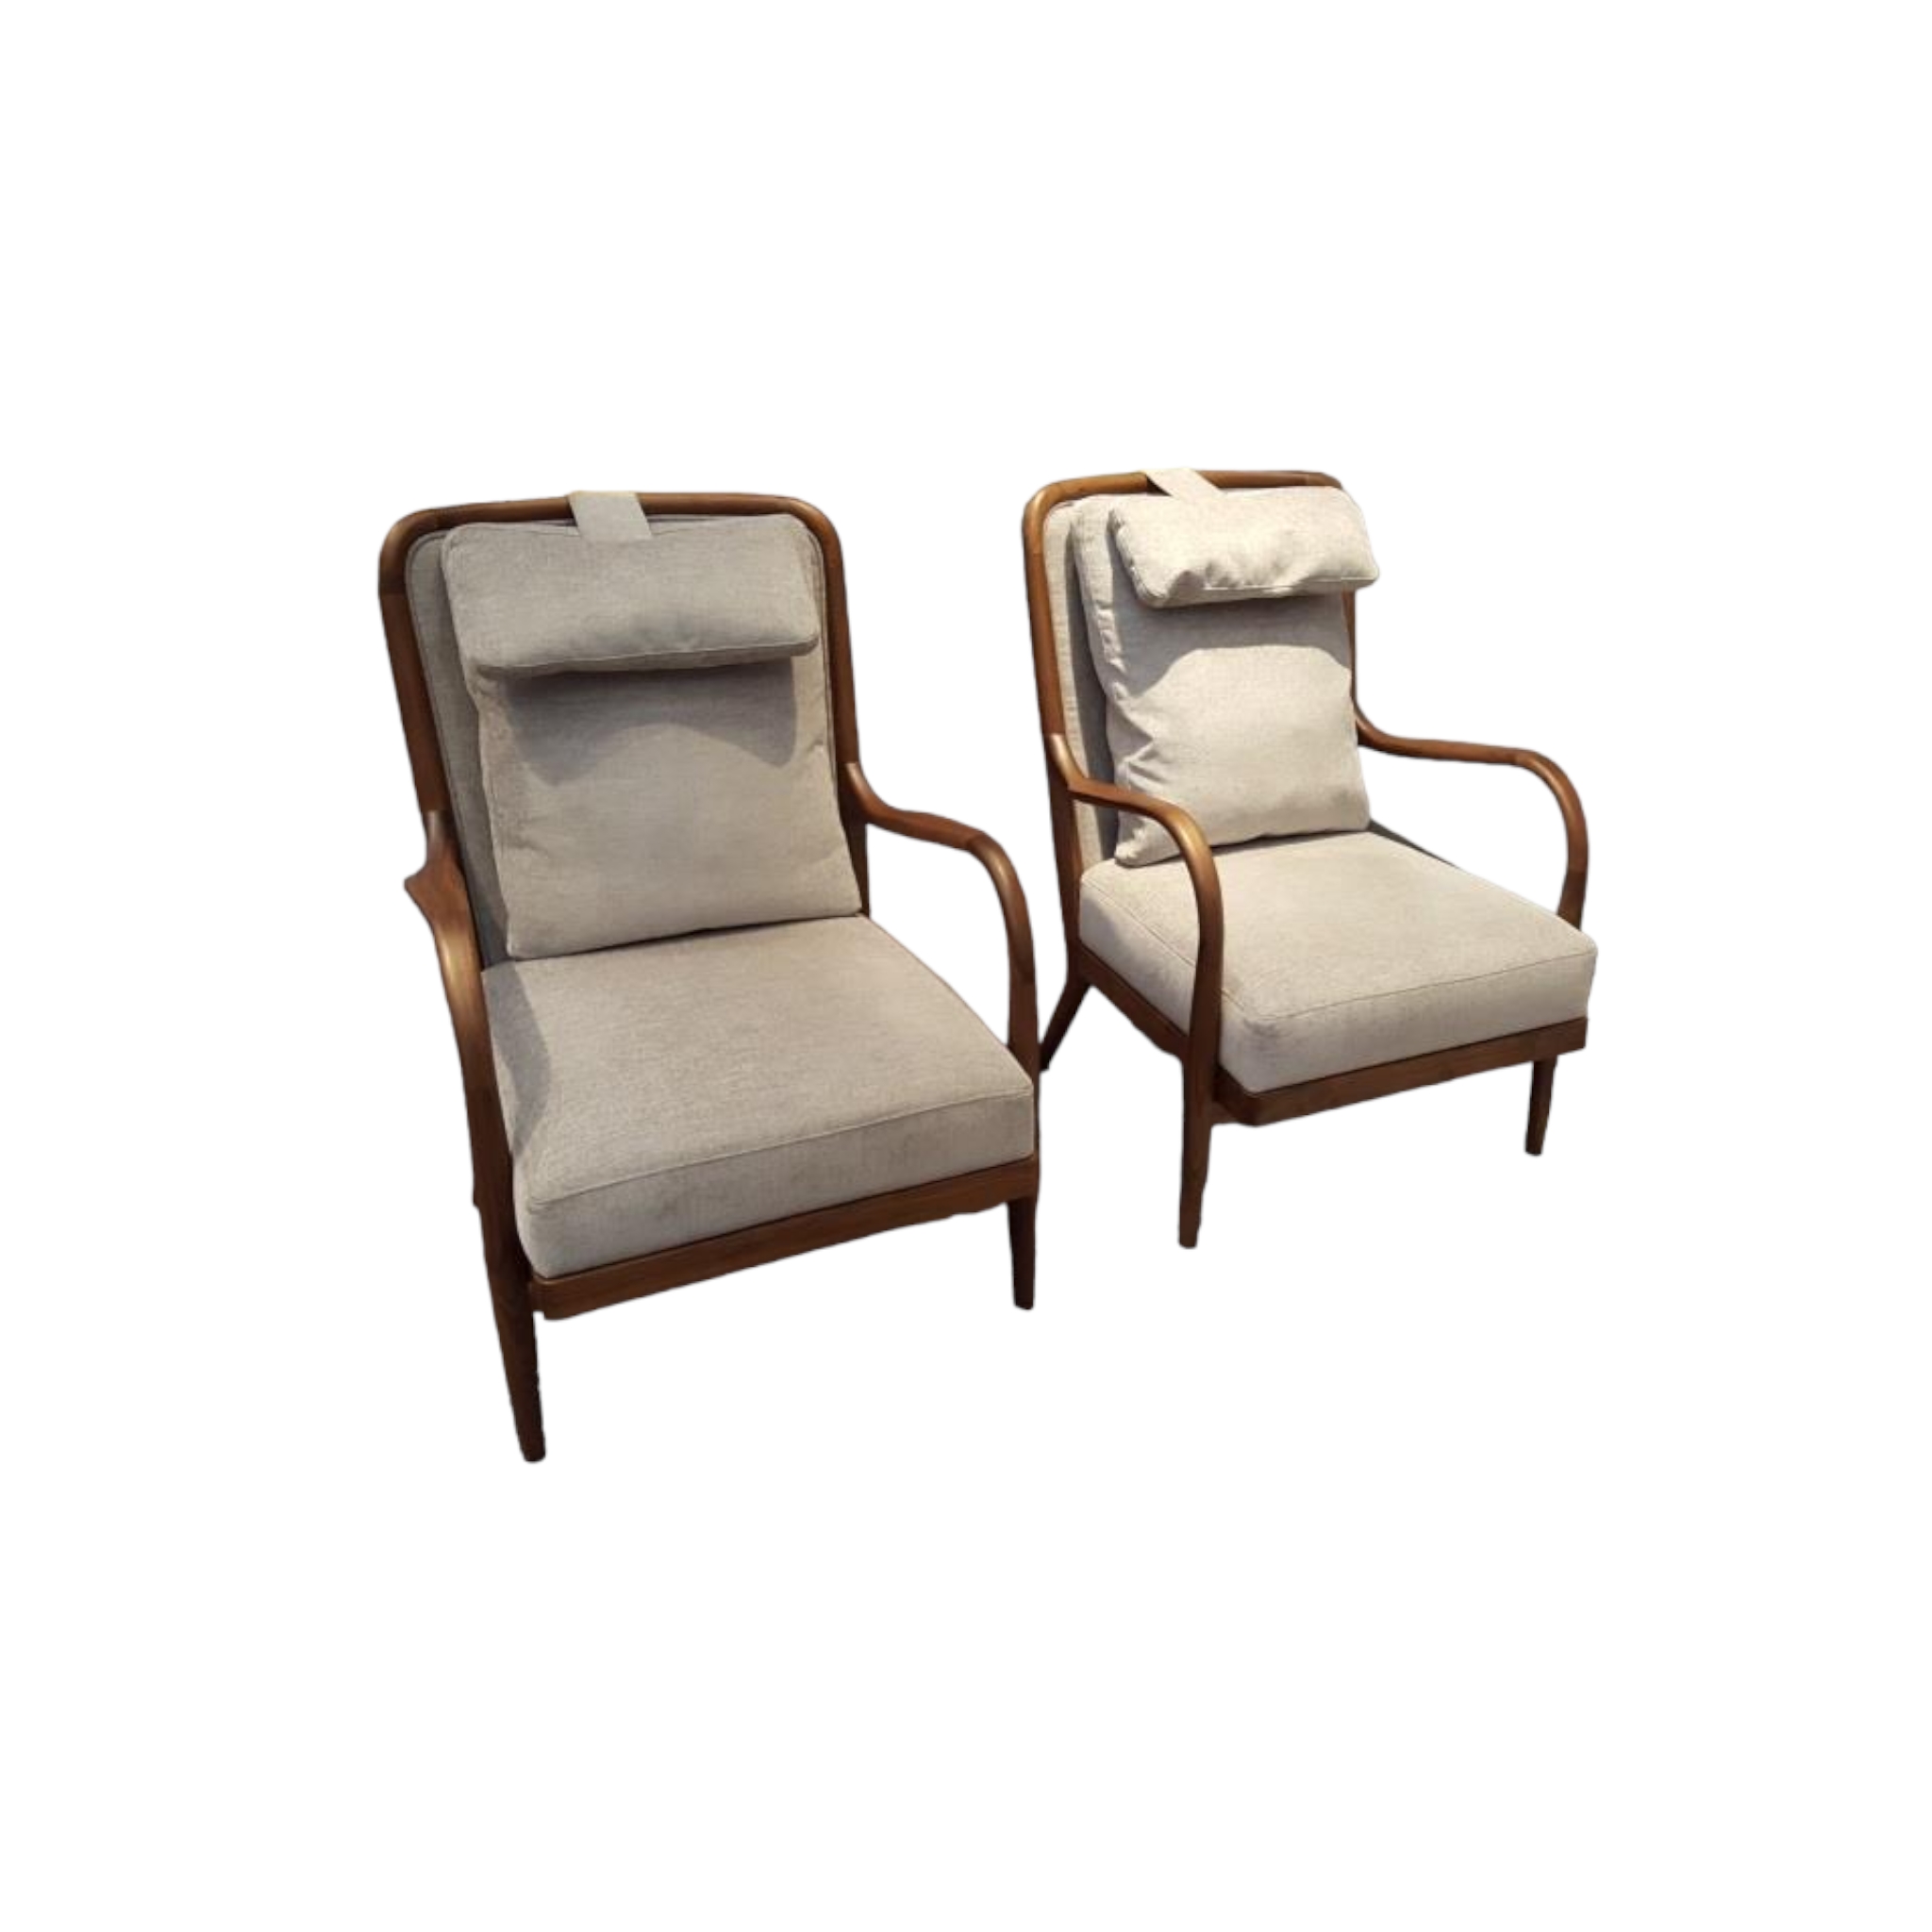 Paraiso Lounge Chair (set of 2)